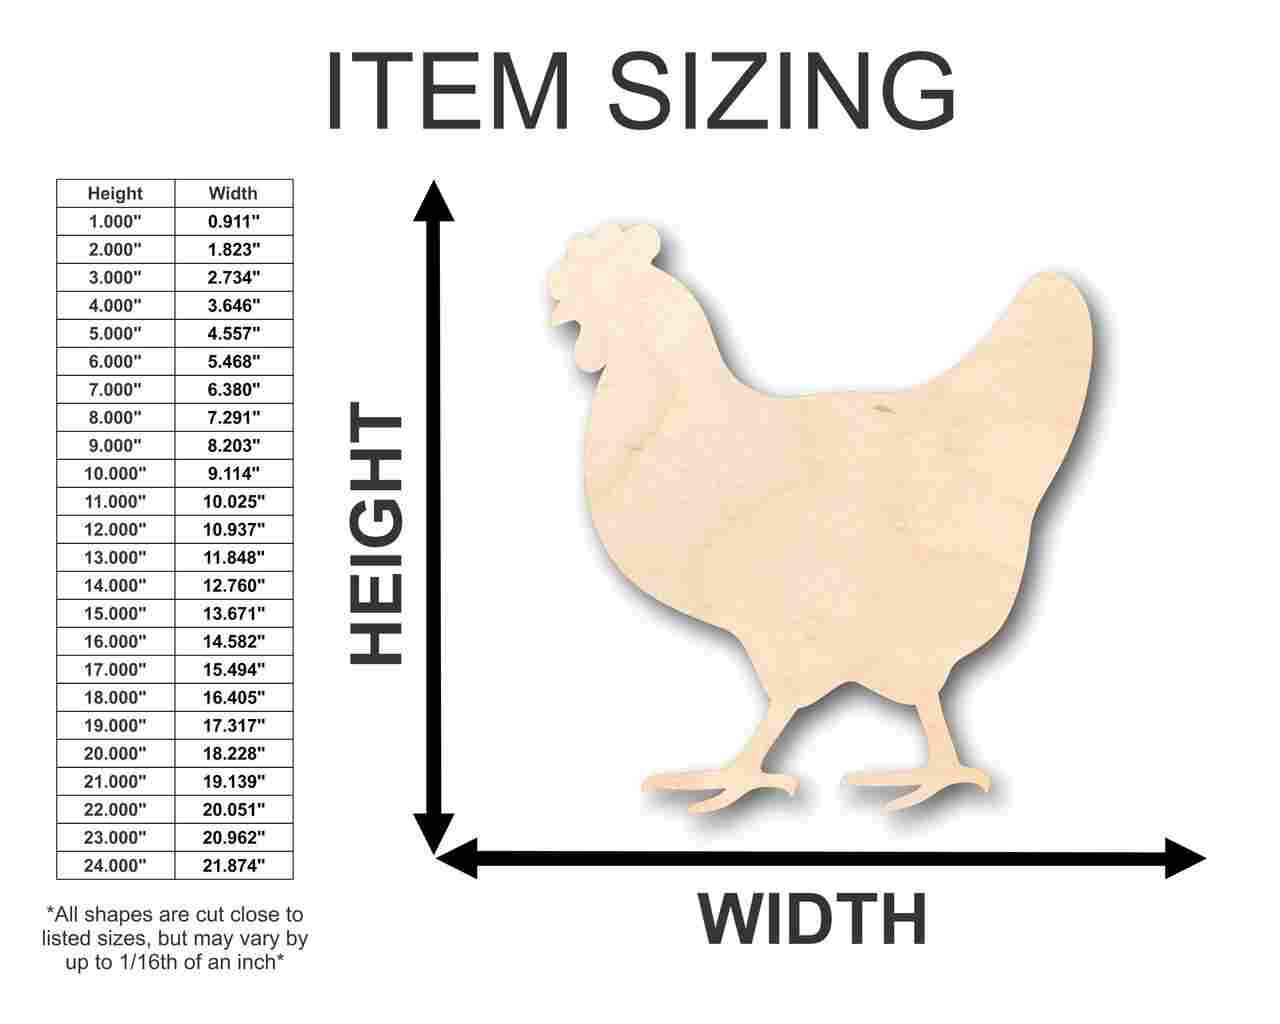 Unfinished Wooden Hen Chicken Shape - Farm Animal - Craft - up to 24